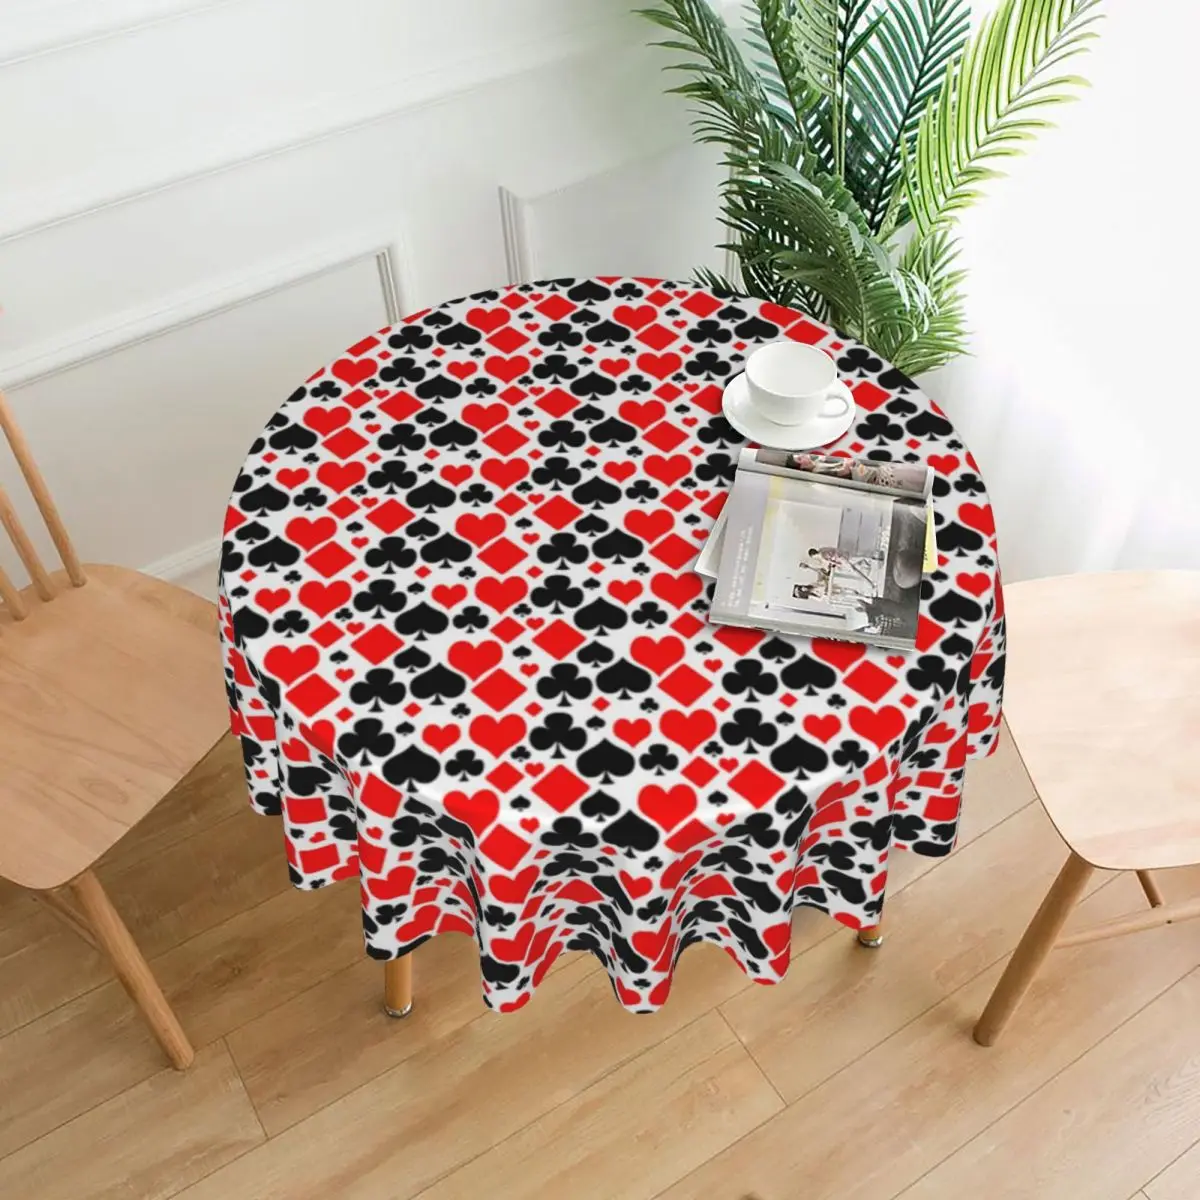 

Poker Print Tablecloth Hearts Diamonds Clubs Spades Protection Picnic Table Cover Square Print Polyester Wholesale Table Cloth